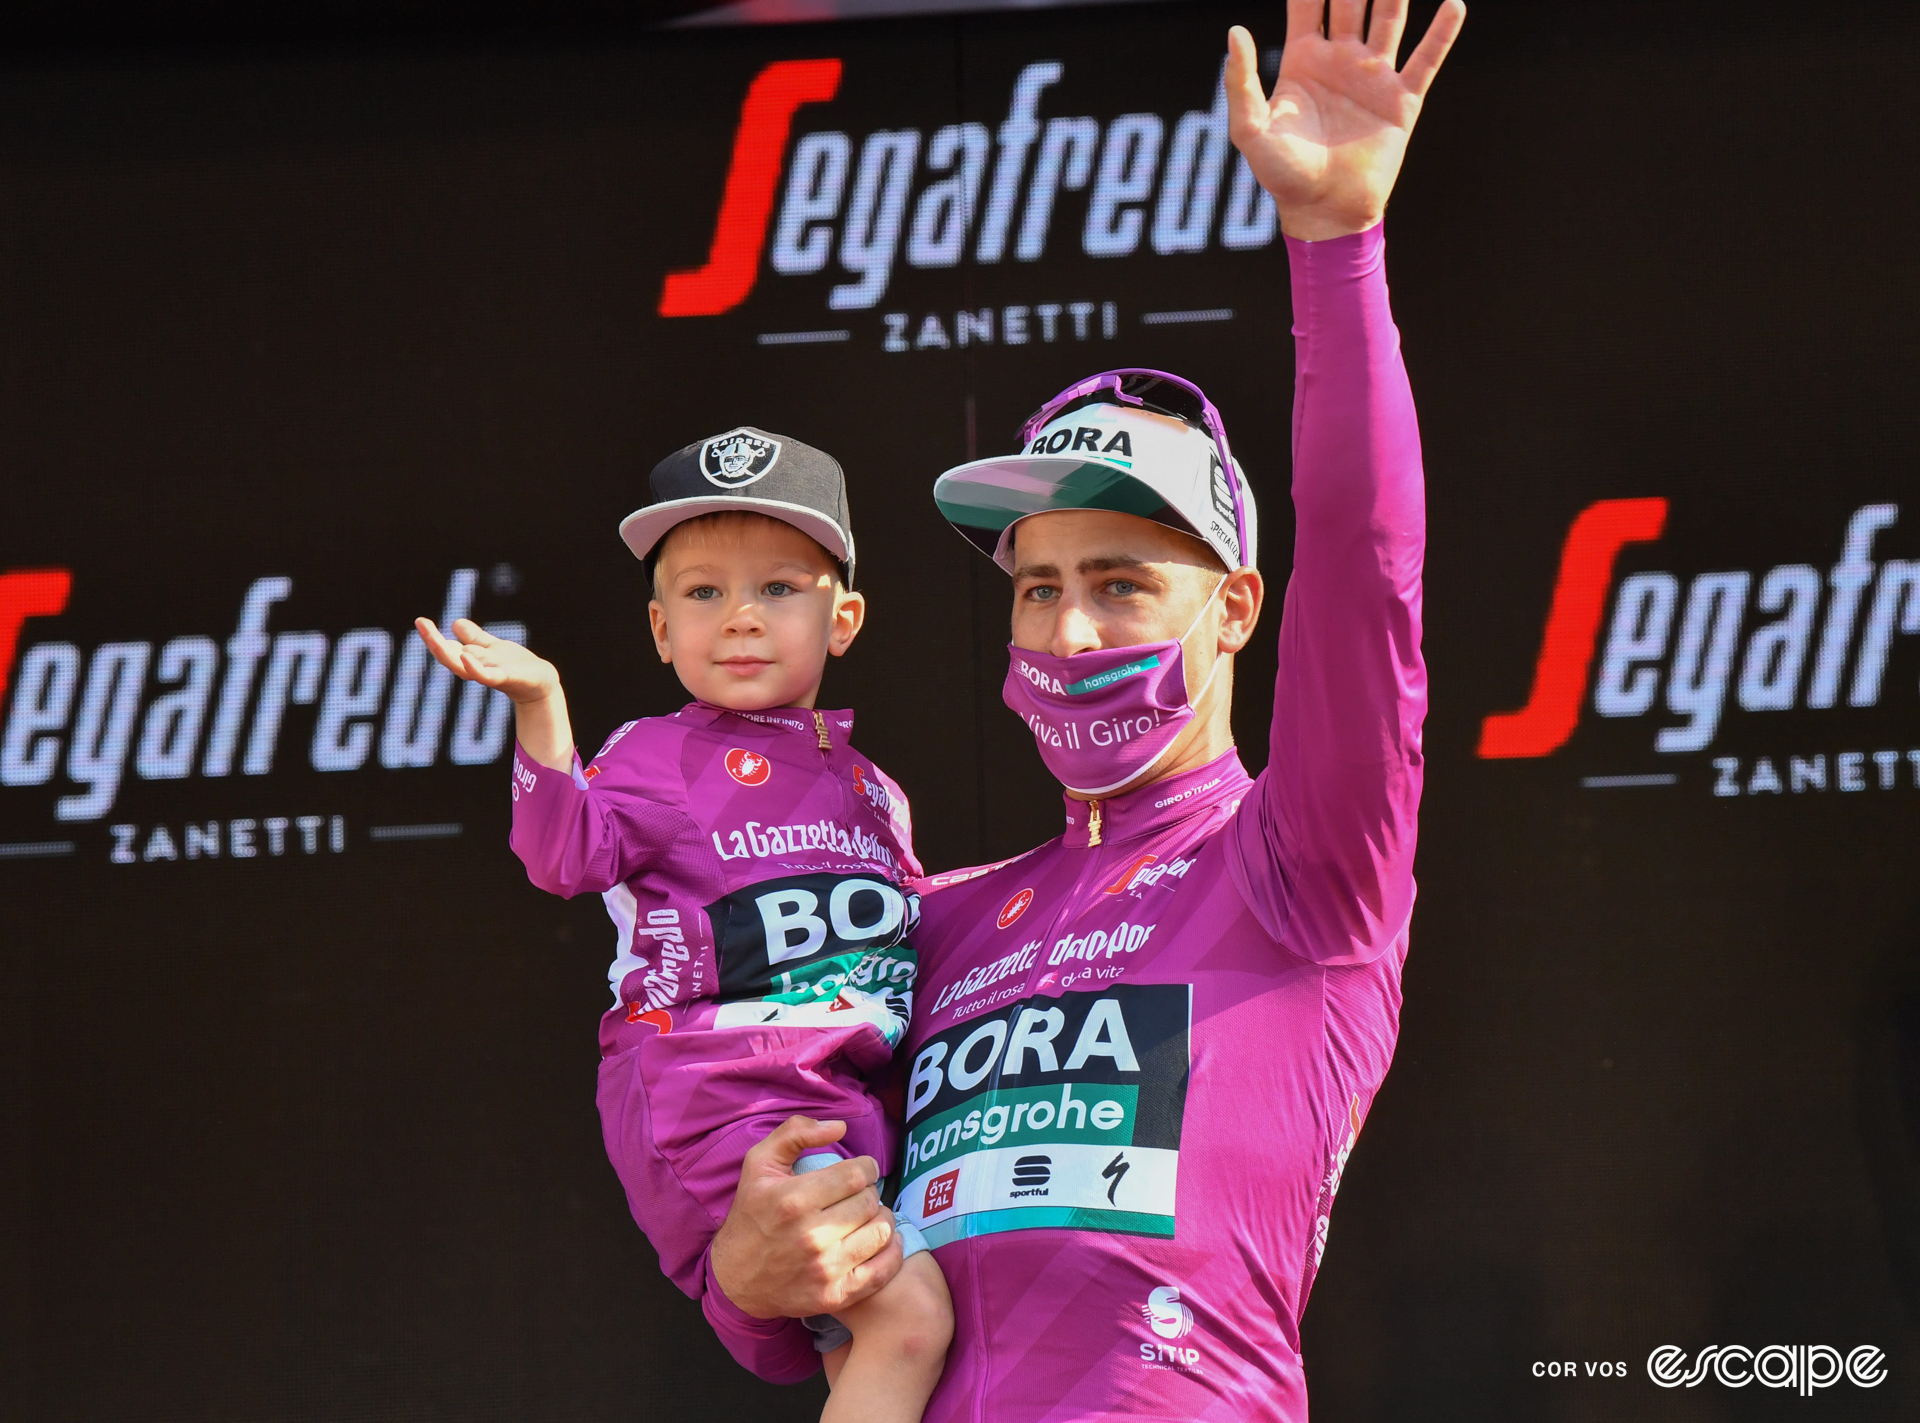 Peter Sagan stands on the final podium at the 2021 Giro d'Italia, dressed in the purple jersey of points classification leader, wearing a purple mask on his face, and holding his young son who's also in purple.